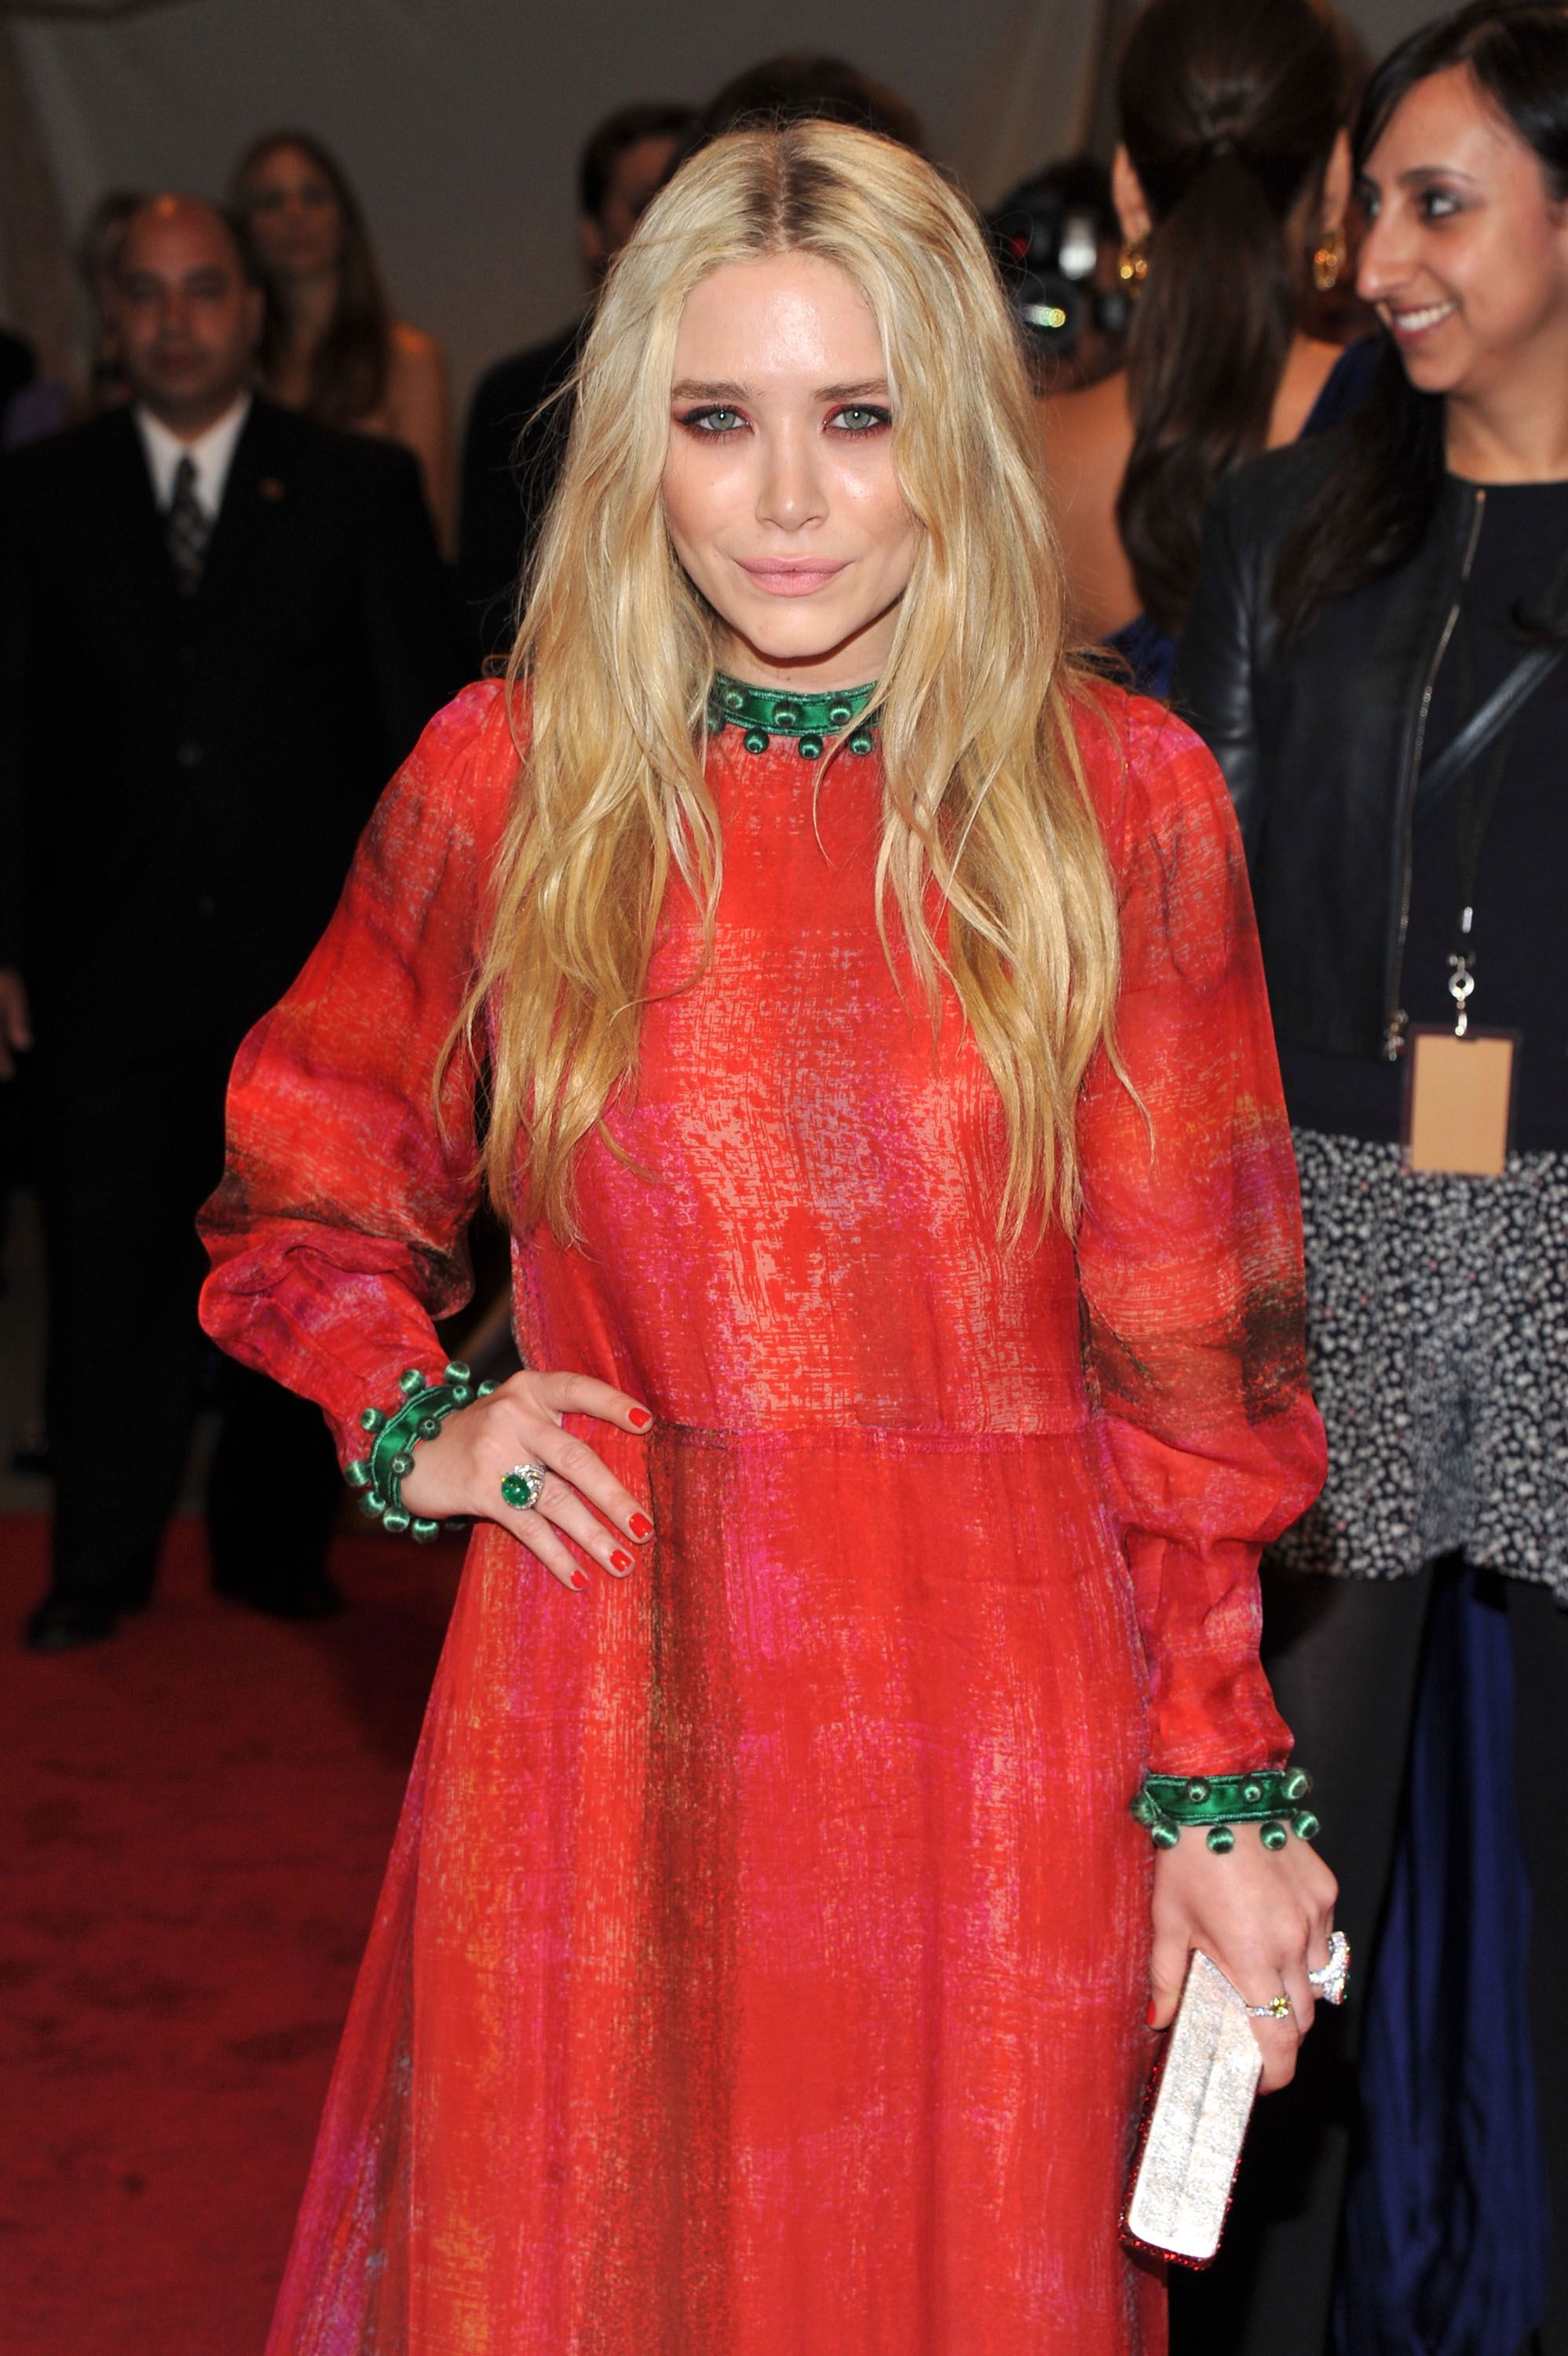 Mary-Kate Olsen during the "Alexander McQueen: Savage Beauty" Costume Institute Gala at The Metropolitan Museum of Art on May 2, 2011 in New York City. | Photo: Getty Images